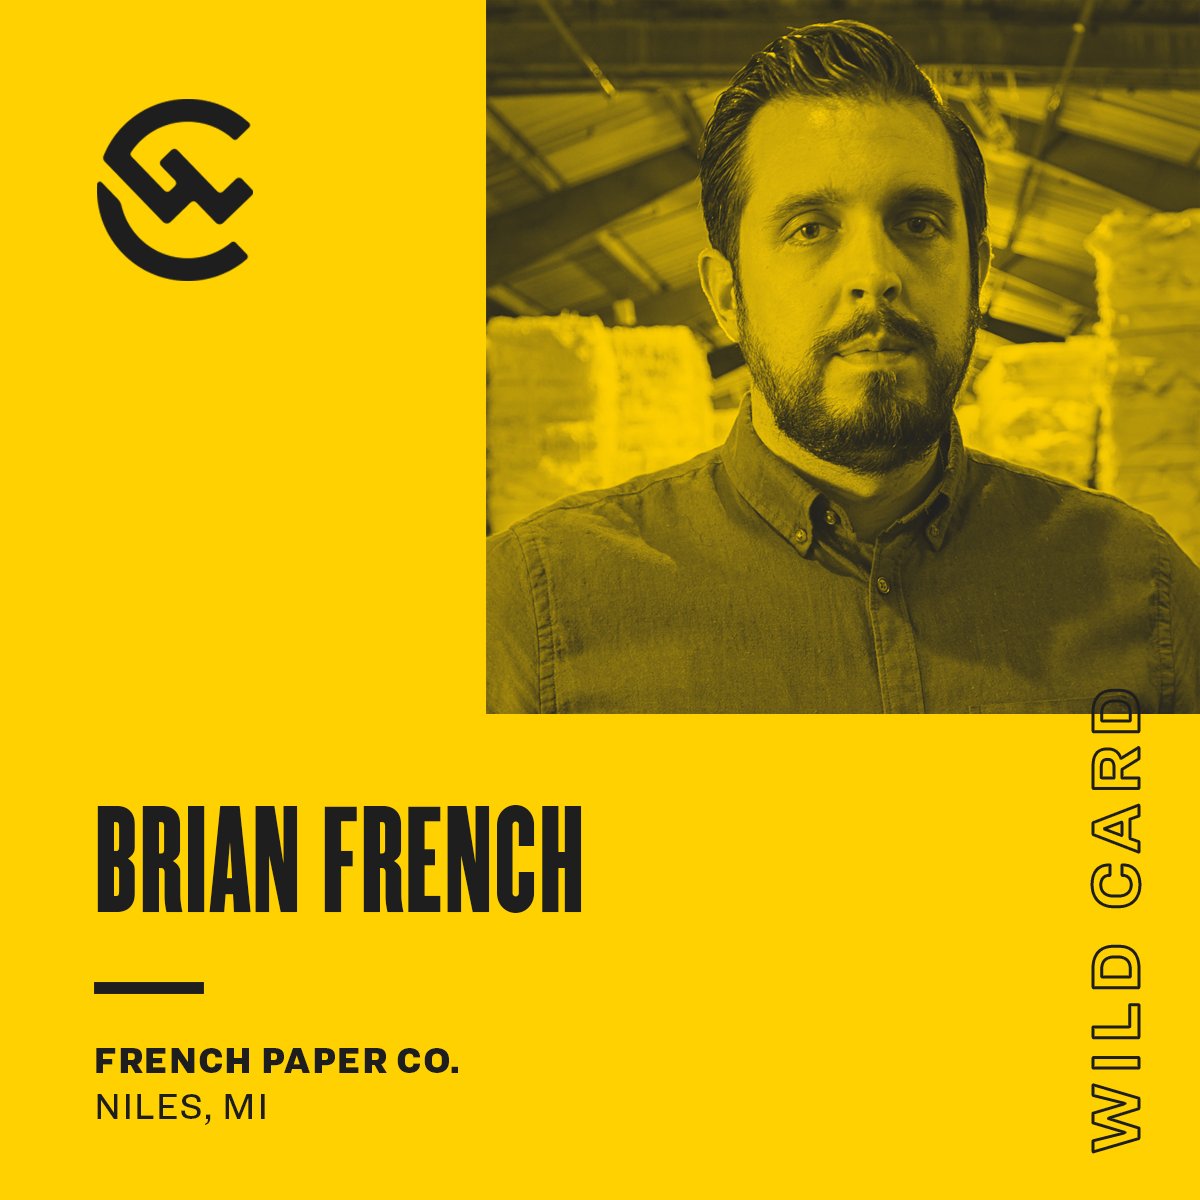 WILD CARD SESSION: Brian French from @FrenchPaperCo, one of the last, small, independent mills in America, has been on the road celebrating 150 years of business. Tune in Saturday at 3pm as Brian shares an incredible collection of French Paper's history. #theroadto150 #cwc5